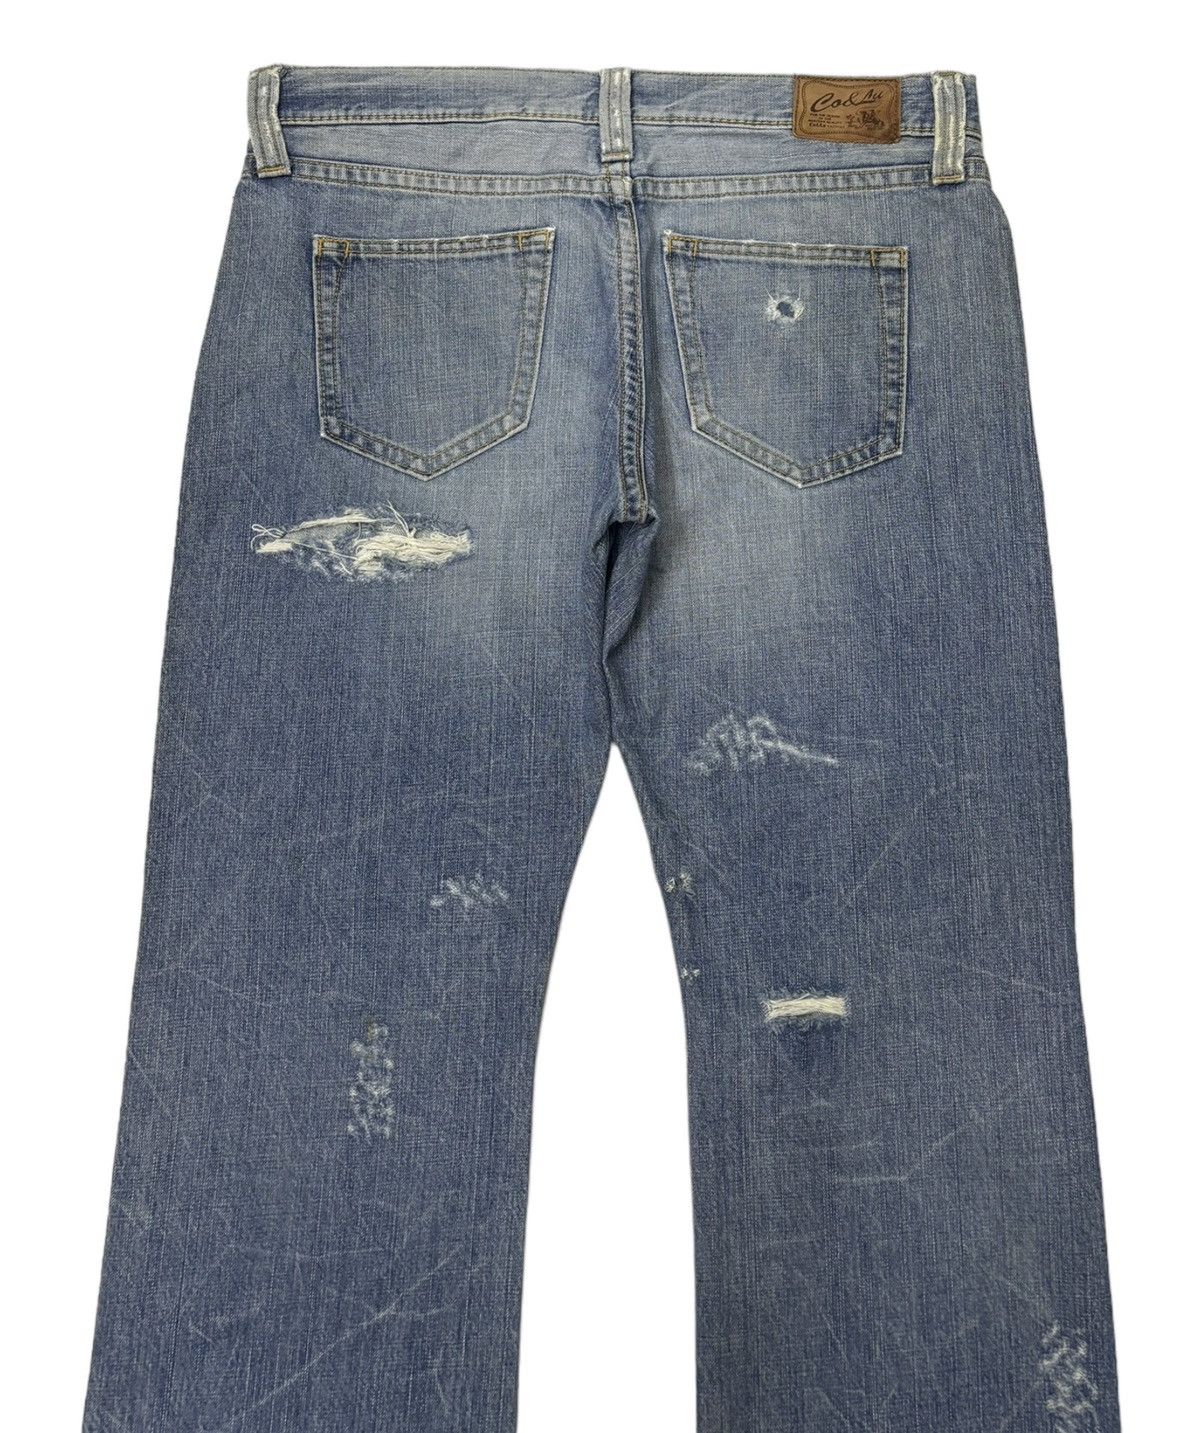 Archival Clothing - VINTAGE CO&LU THRASHED DISTRESS RIPS BAGGY FLARE JEANS - 4